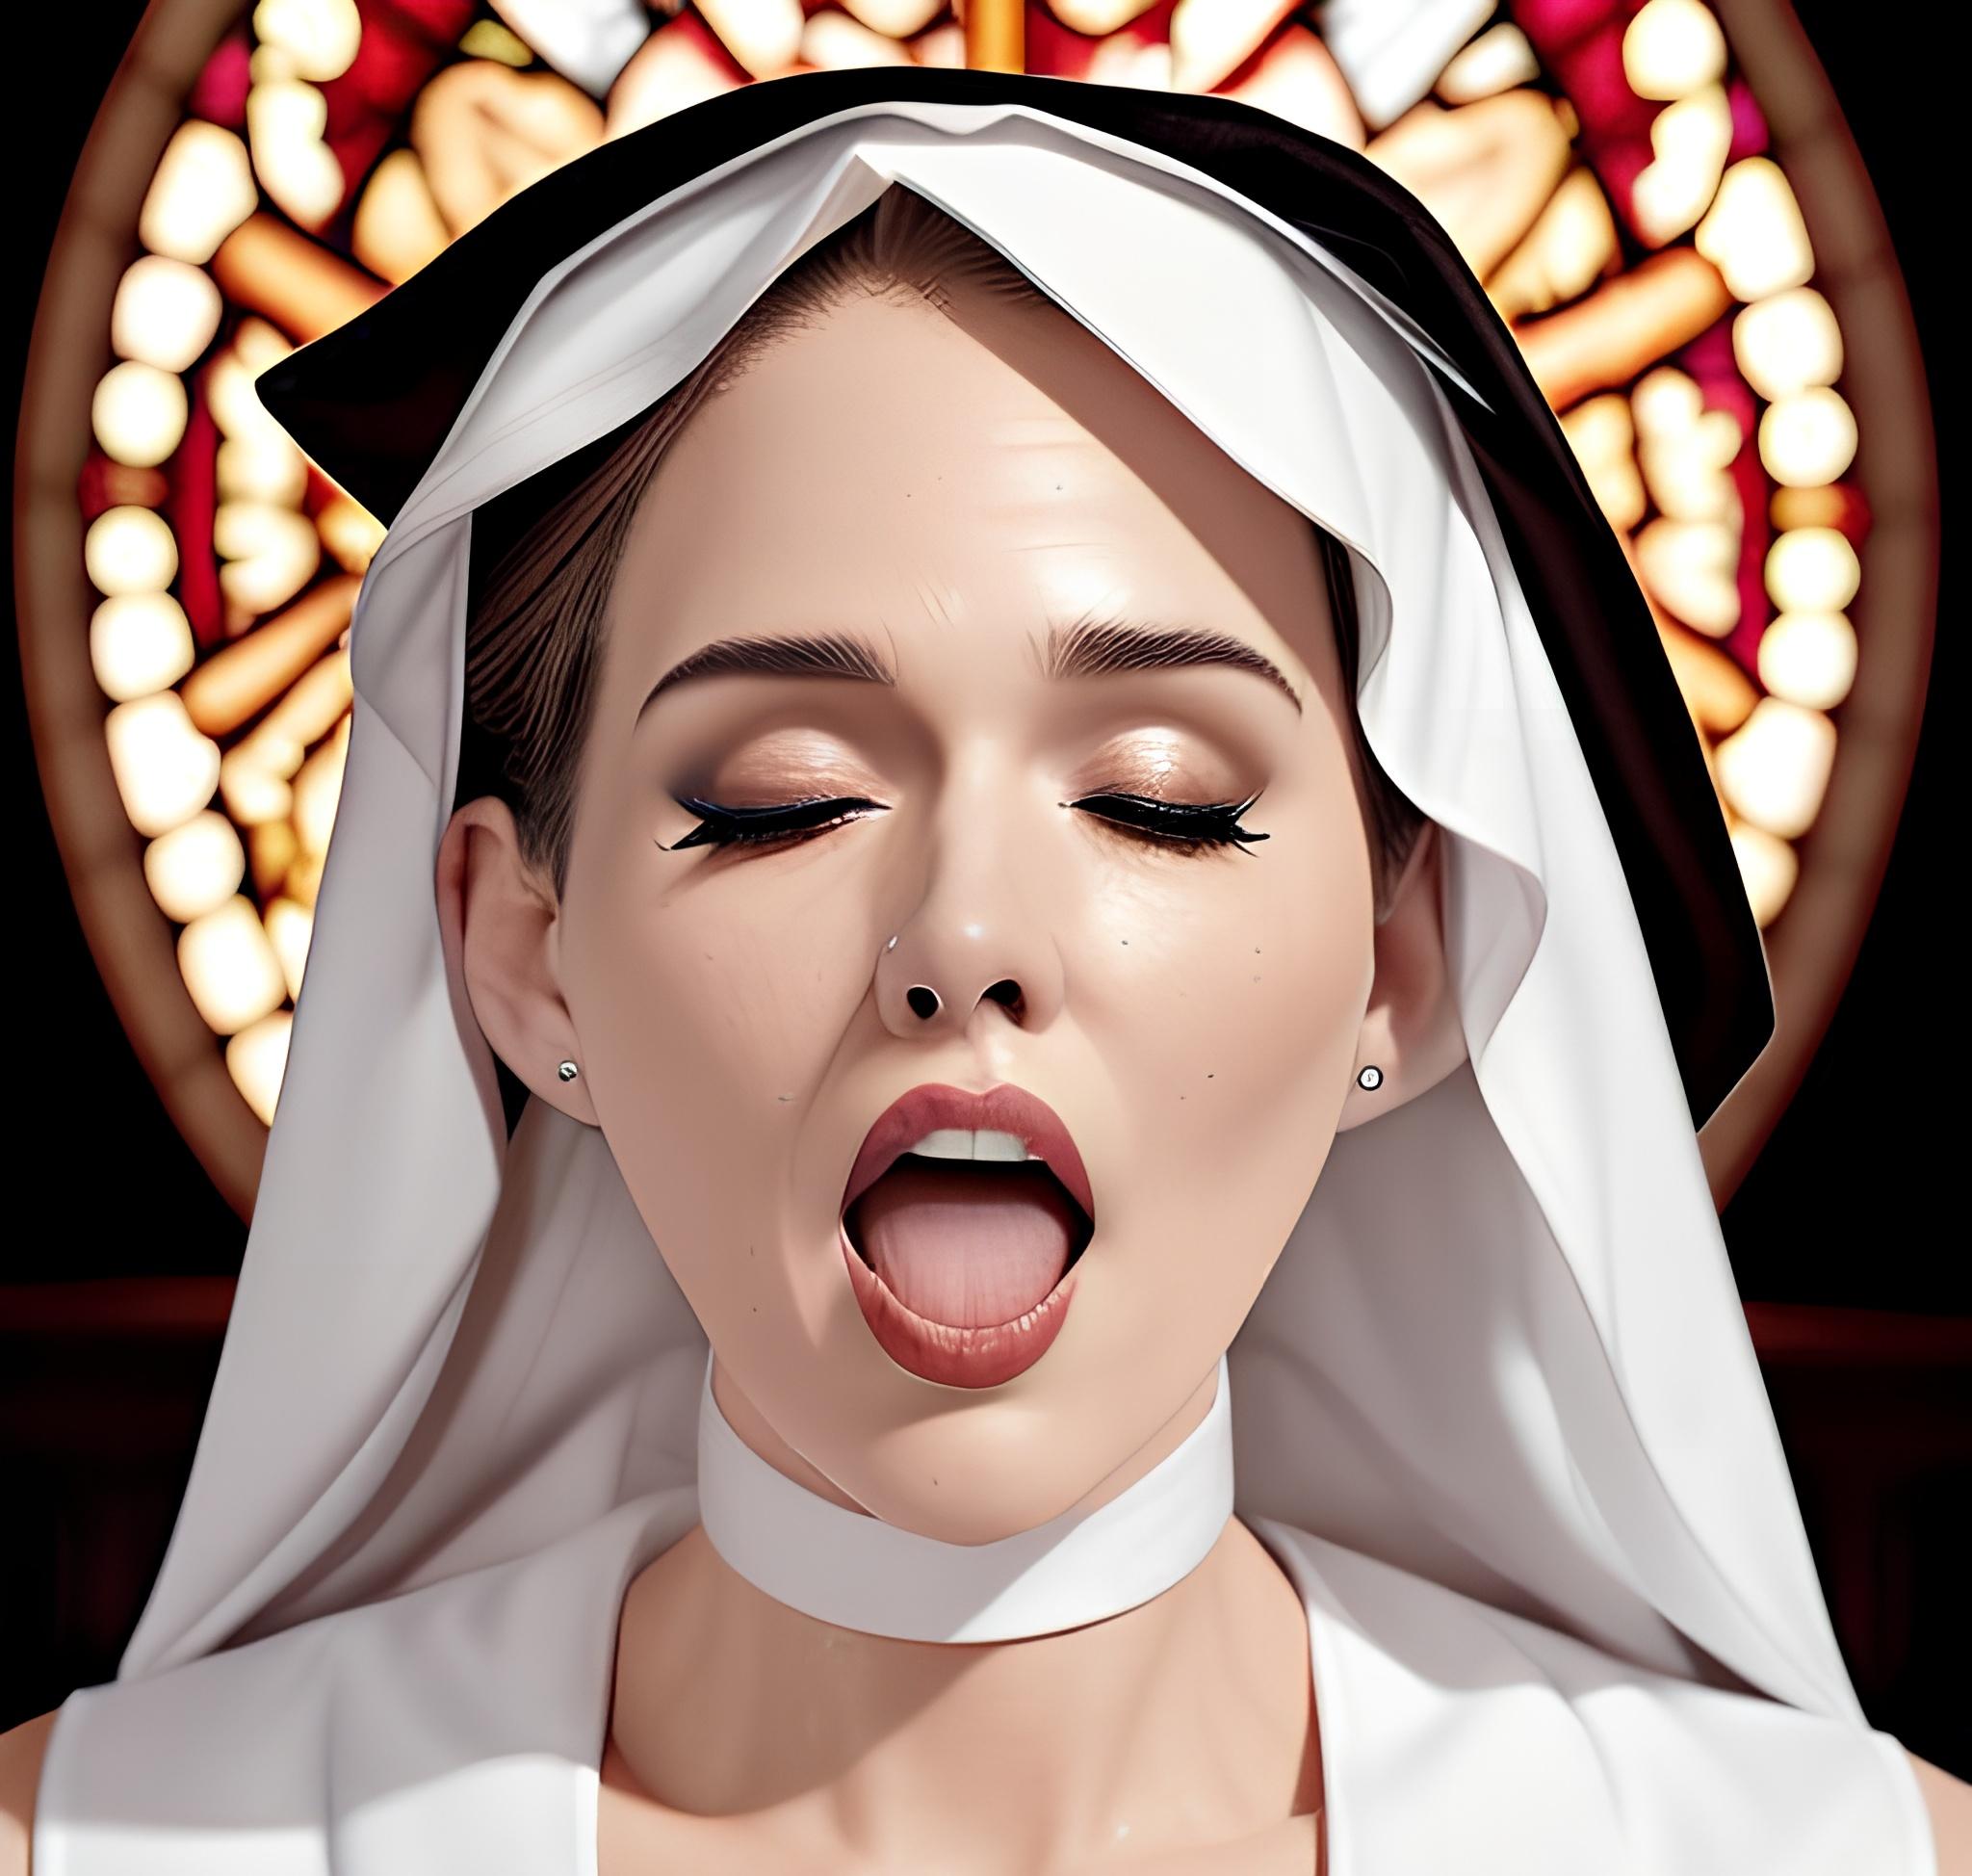 Let the church bells ring, as I cum and confess my sins to the 80yo nuns picture image